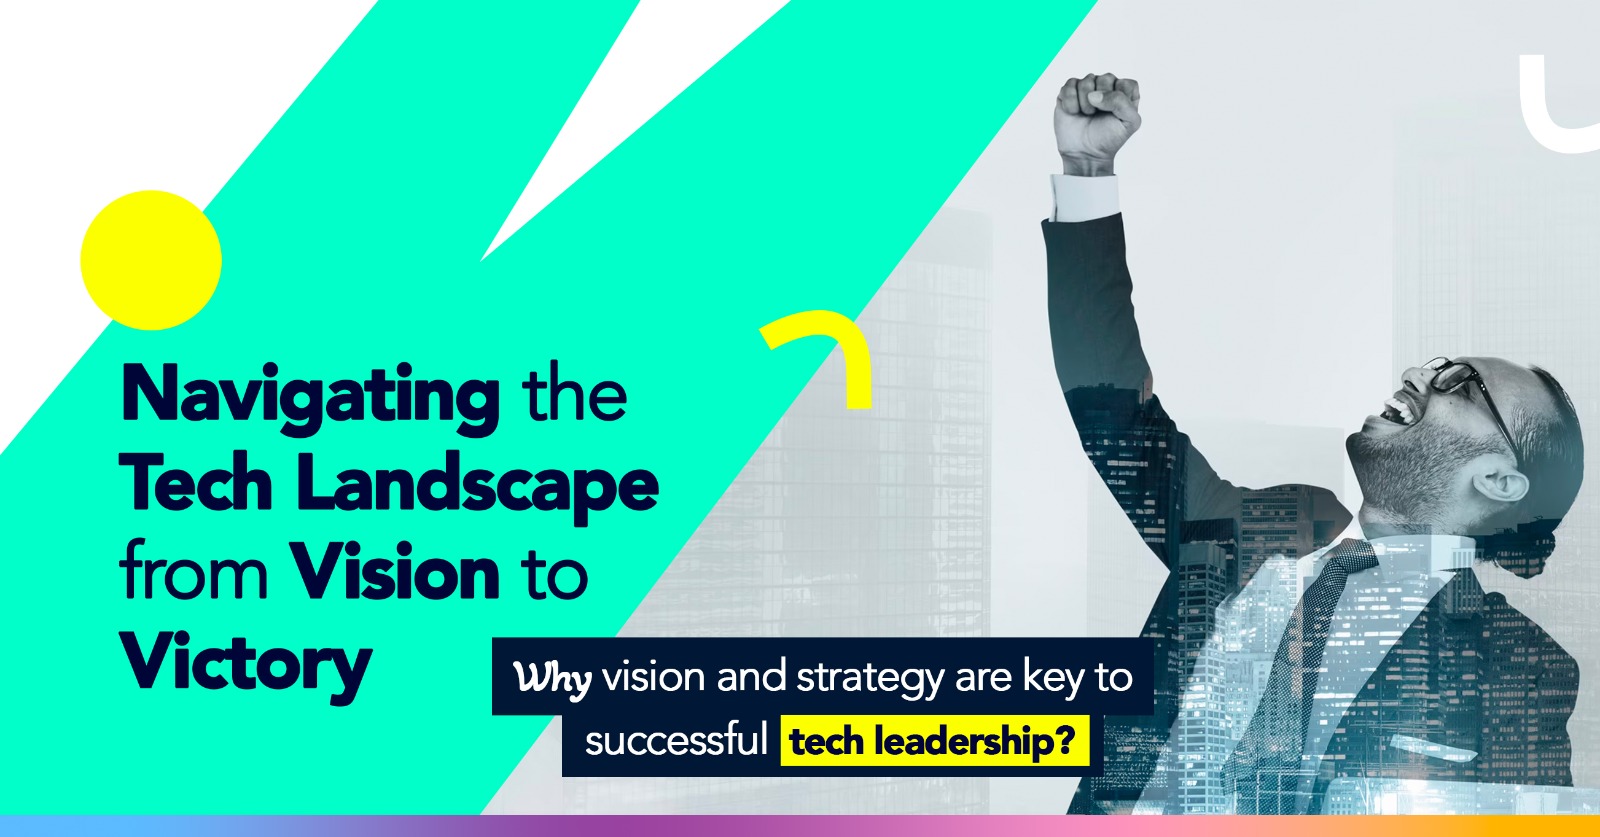 Why vision and strategy are keys to successful tech leadership?